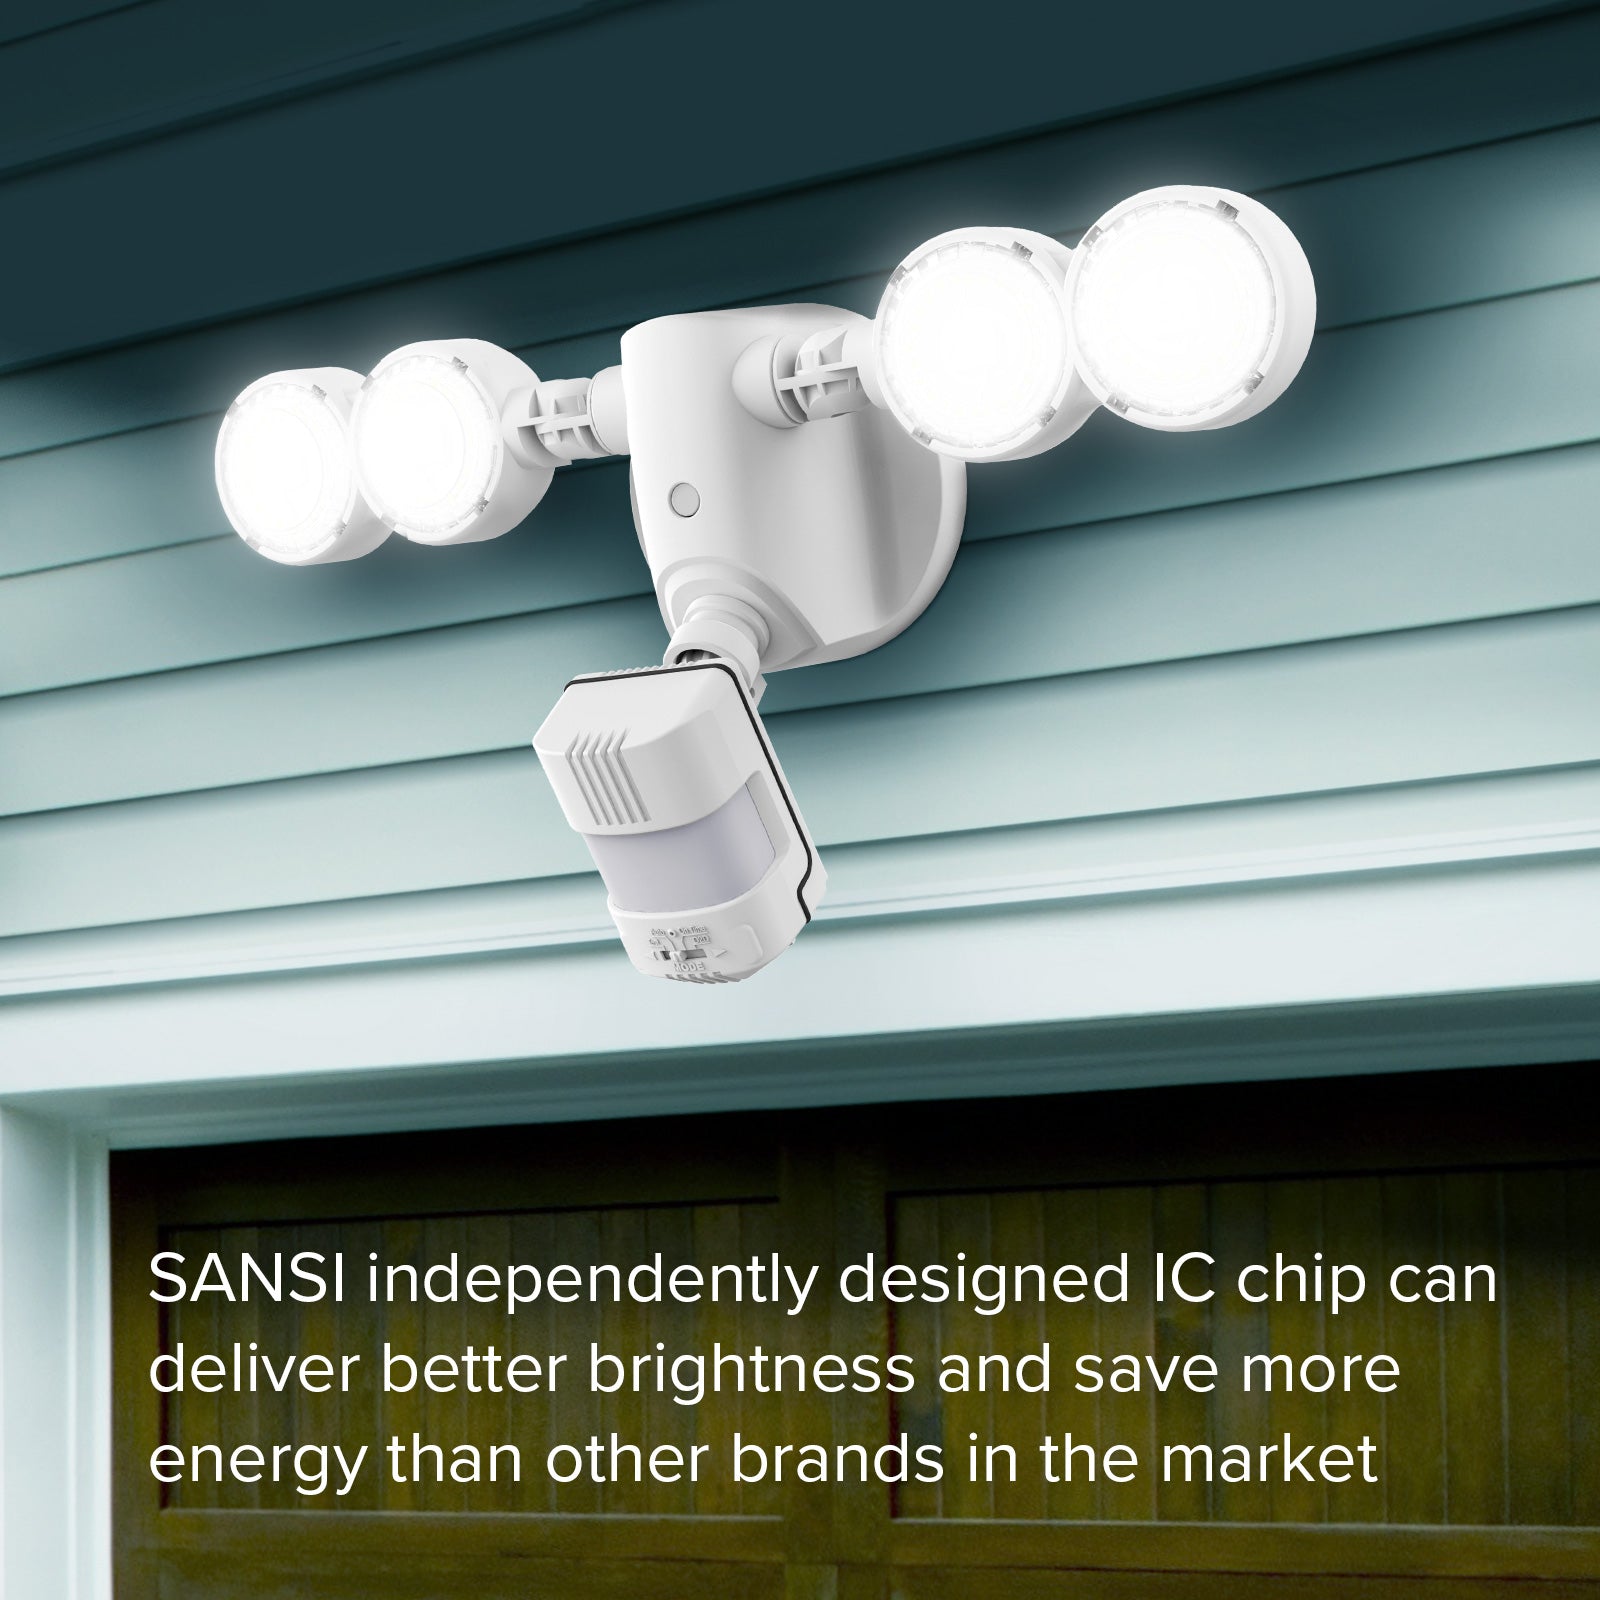 30W LED Security Light (Dusk to Dawn & Motion Sensor) adopt the drive power IC chip independently designed by SANSI, superior brightness and save more energy than other brands in the market